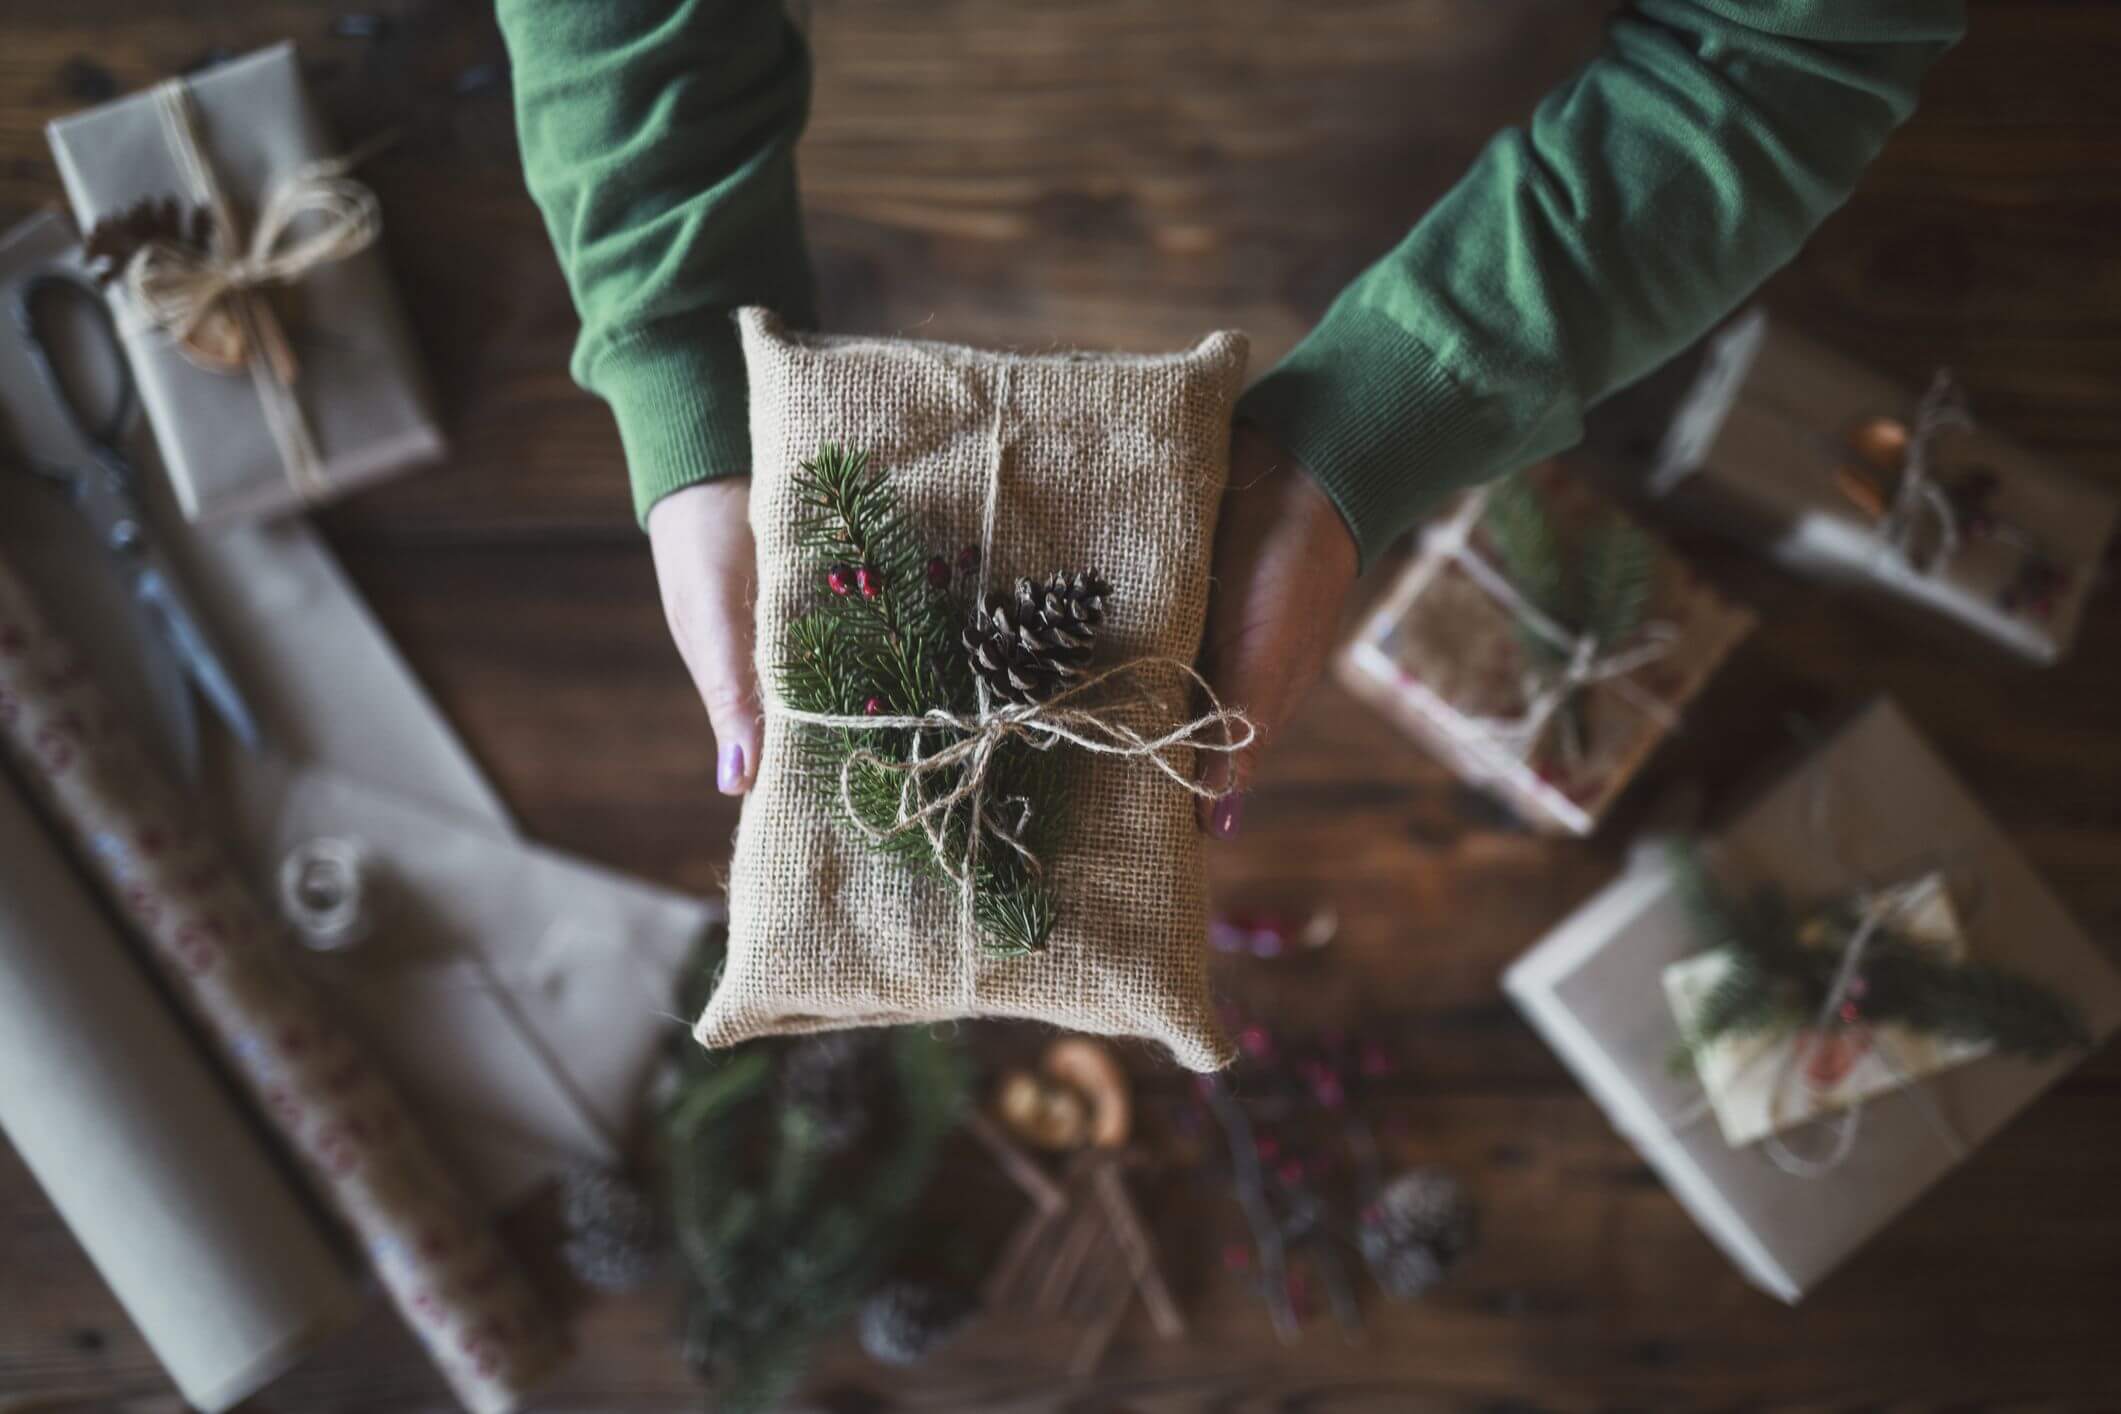 Sustainable Christmas ideas: 8 ways to make this Xmas a little greener